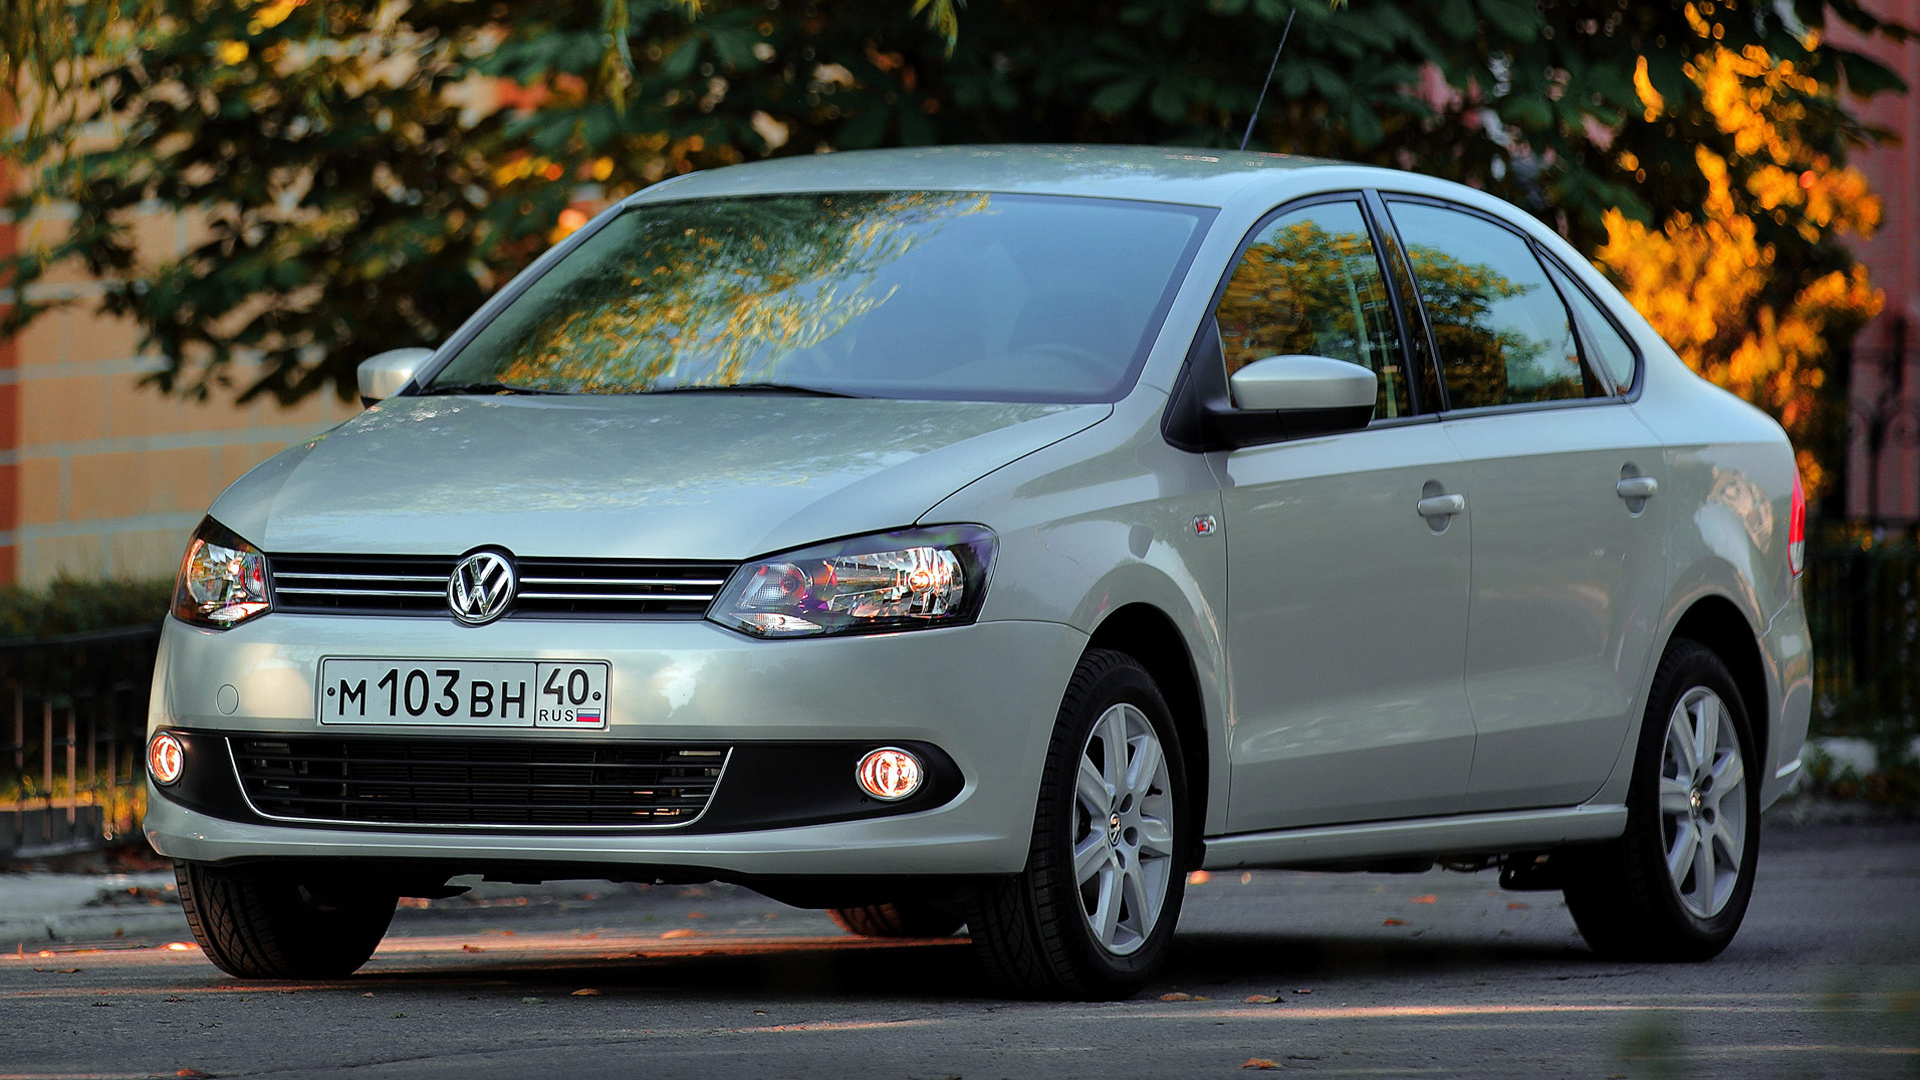 2010 Volkswagen Polo Sedan (RU) Wallpapers and HD Images